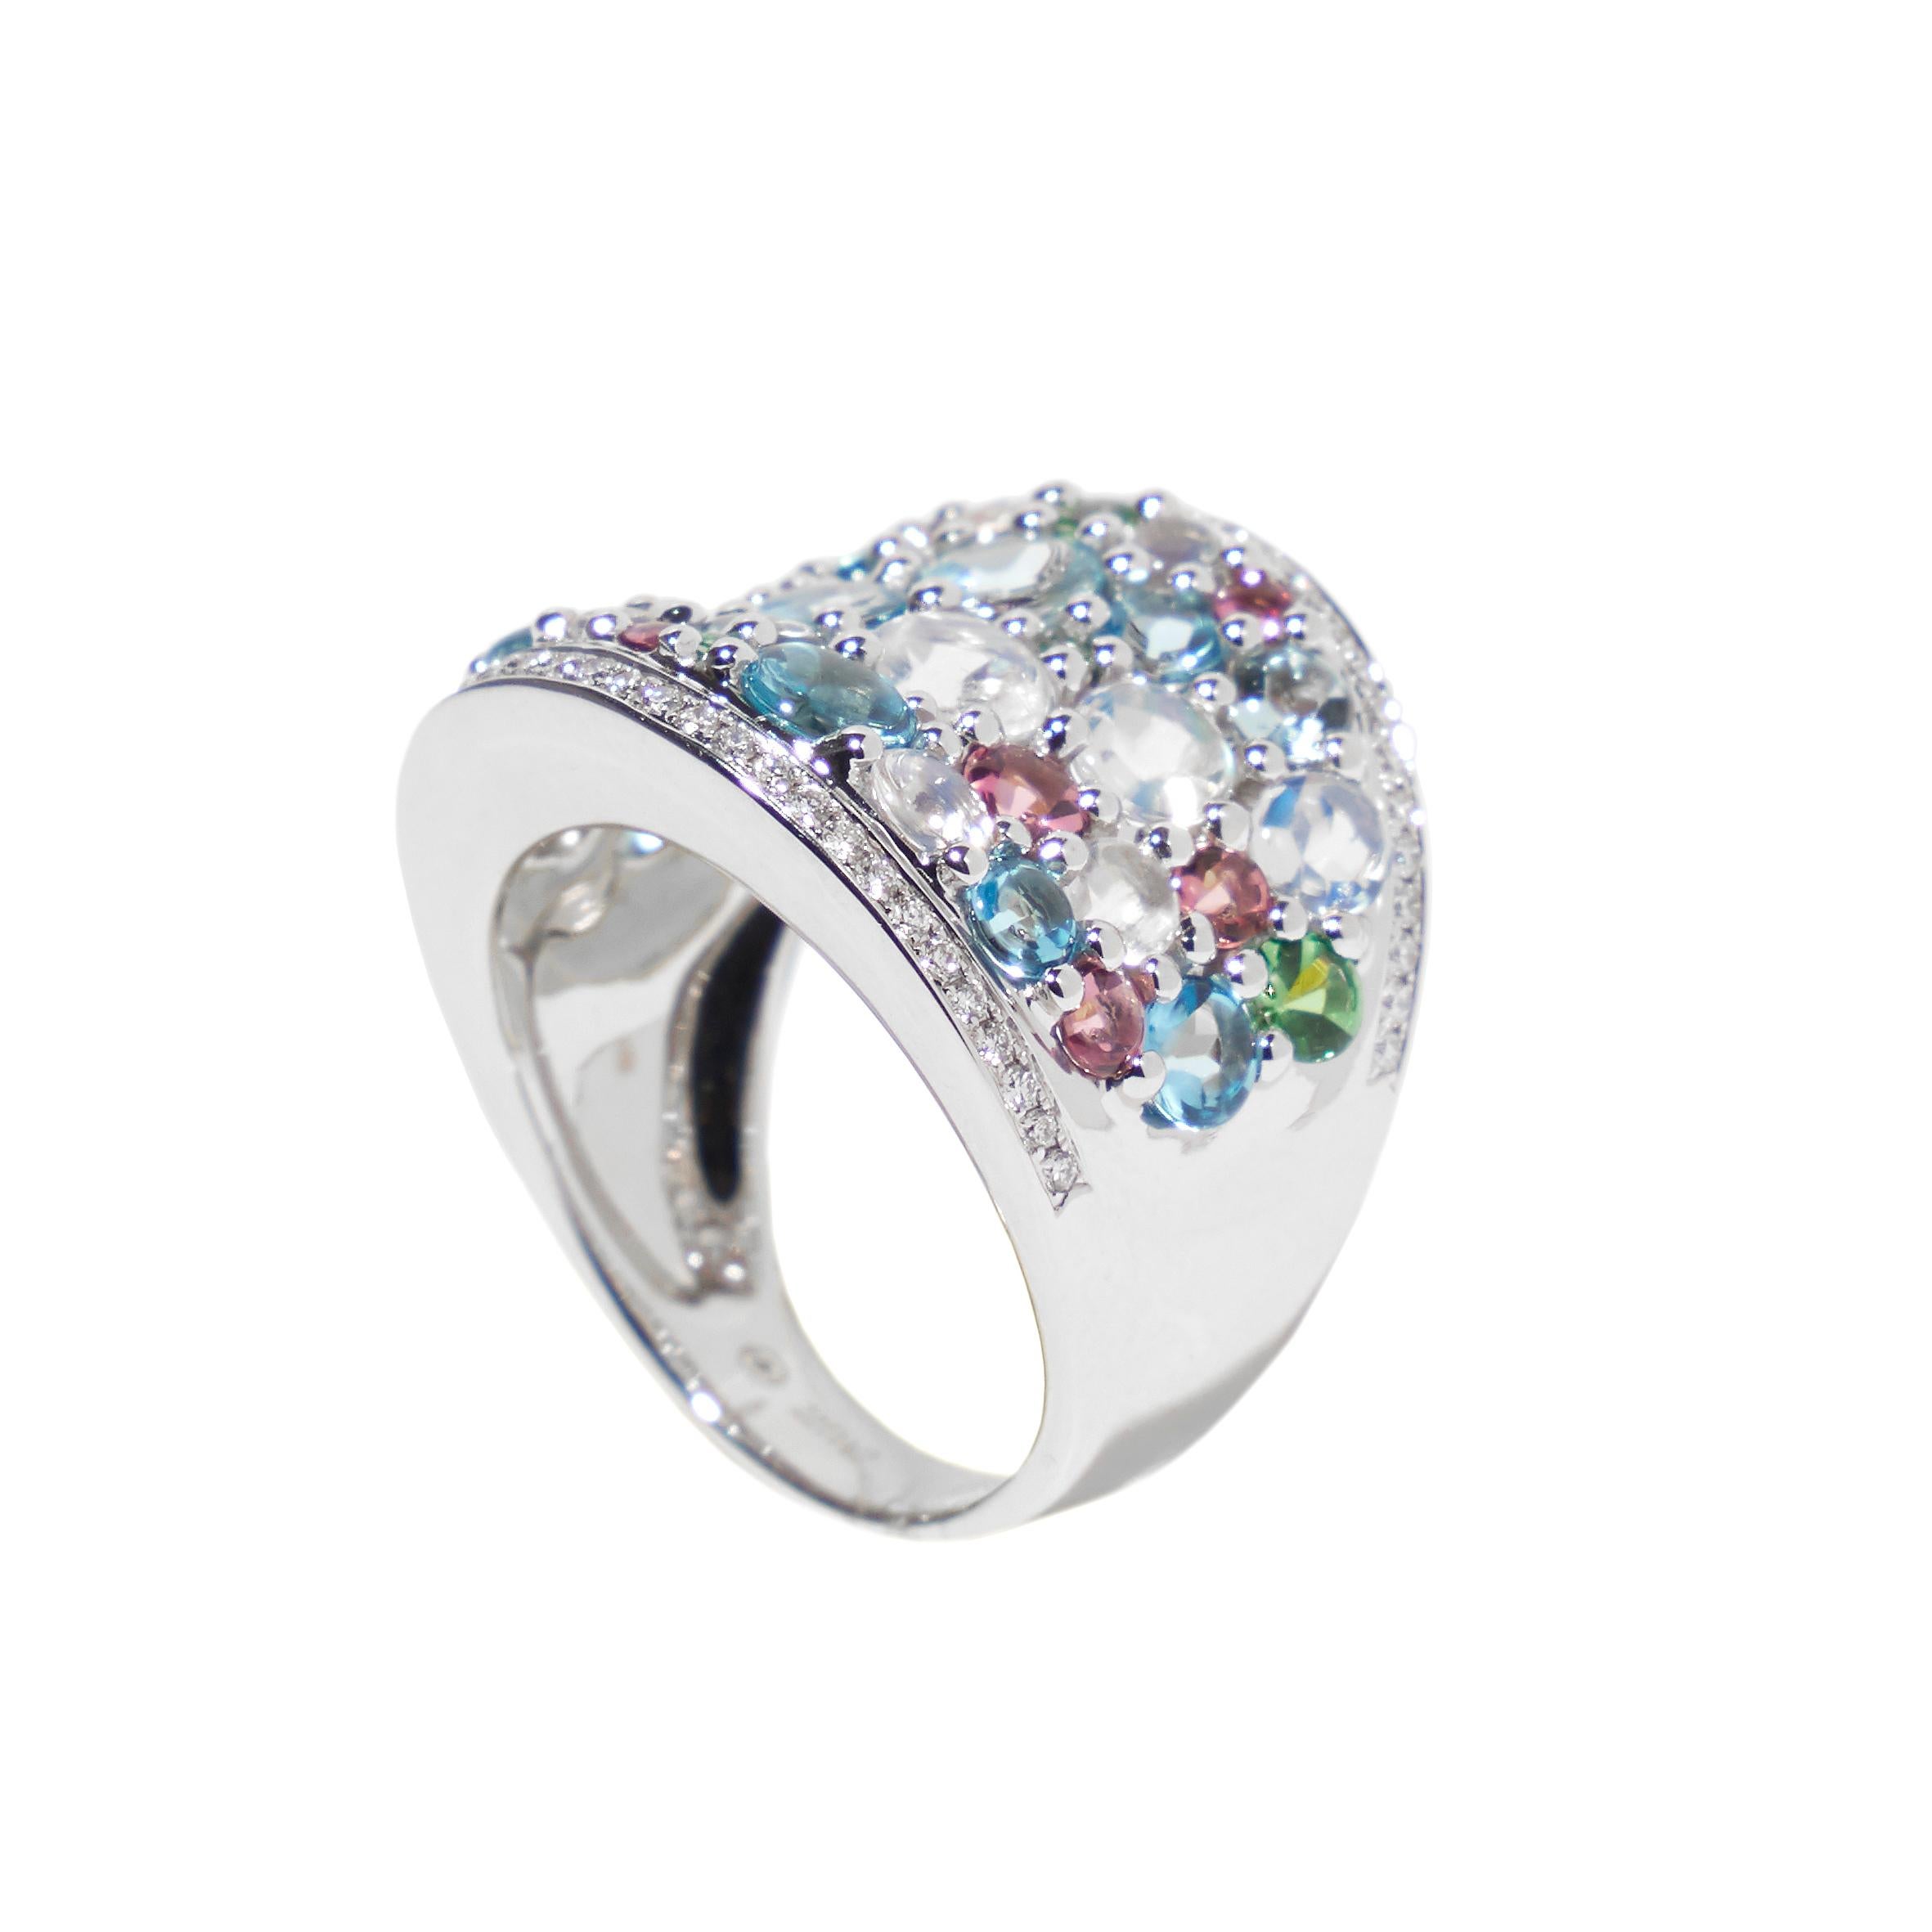 Modern 18 karat mixed gem ring with pink blue and rainbow moonstones For Sale